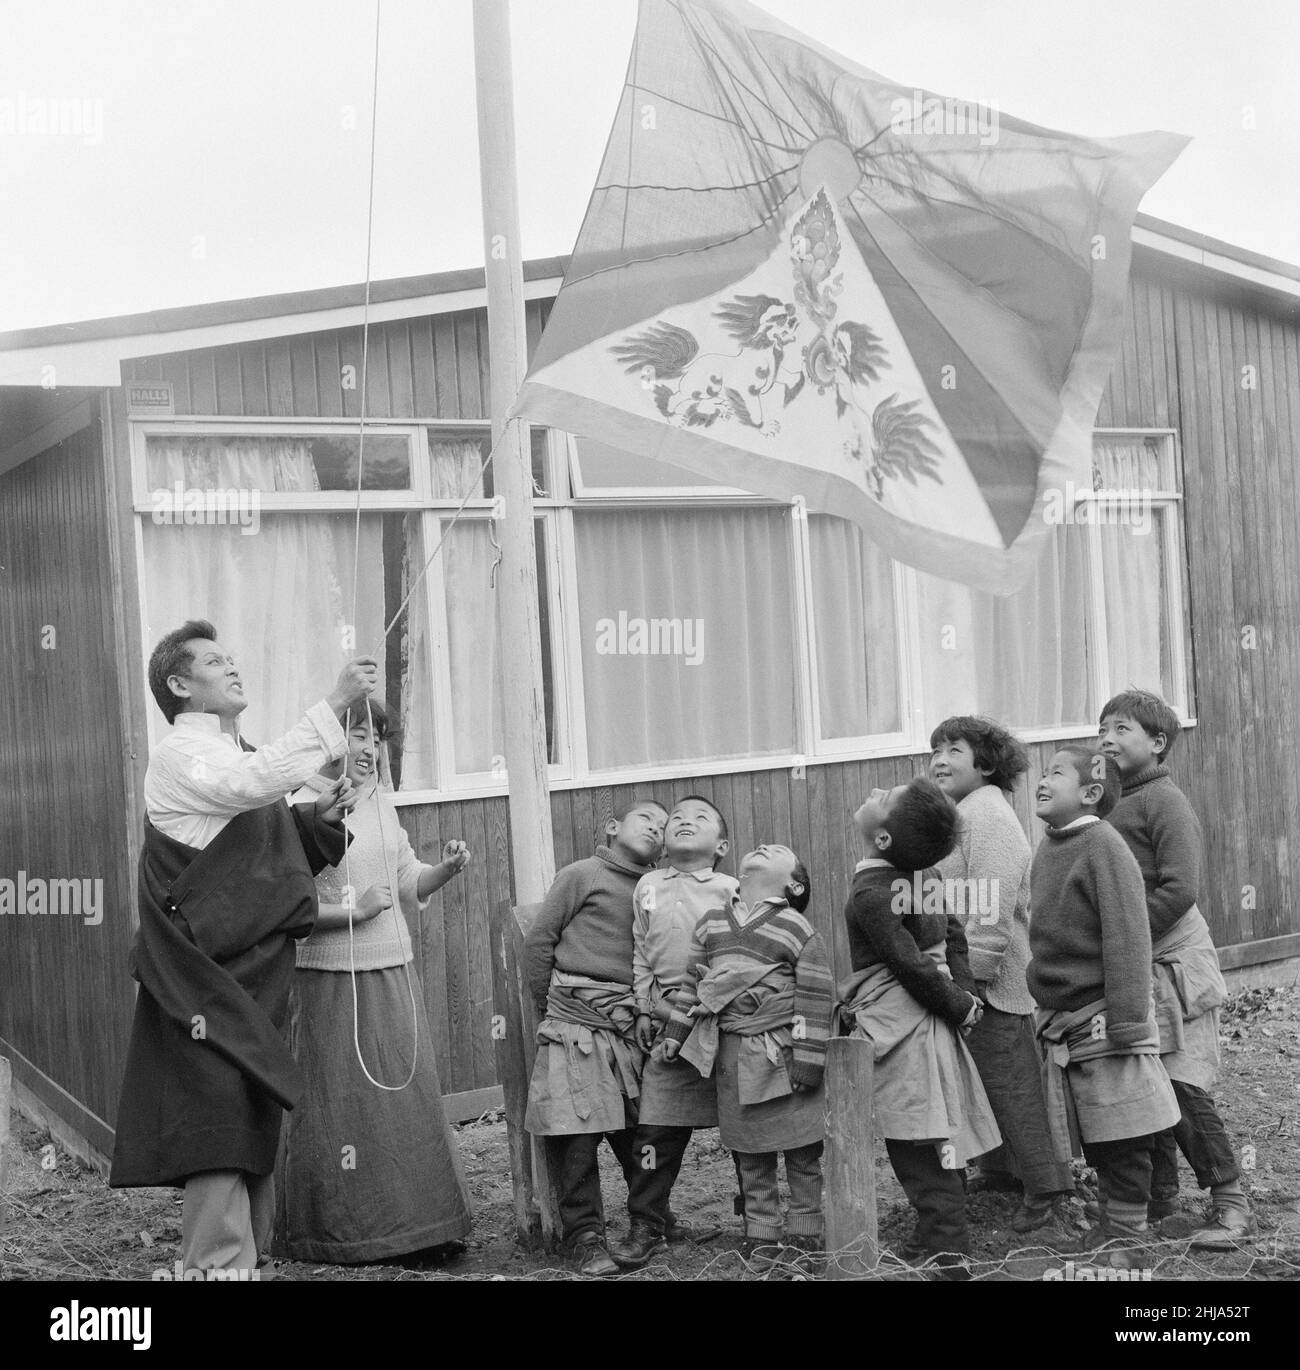 Tibetan Refugee Children at Pestalozzi Village for Children in Sedlescombe, East Sussex, 7th March 1963. Our Picture Shows ... every morning, the Tibetan Flag is run up at their modest home.   The thirteen boys and eight girls arrived in the UK, from a refugee camp in northern India. Many now orphaned, the children have fled chinese occupation and persecution.   The community is named after eighteenth century Swiss educationalist, Johann Heinrich Pestalozzi, who devoted his life to closing divisions in society through education of the whole person, their Head, Heart and Hands. Stock Photo